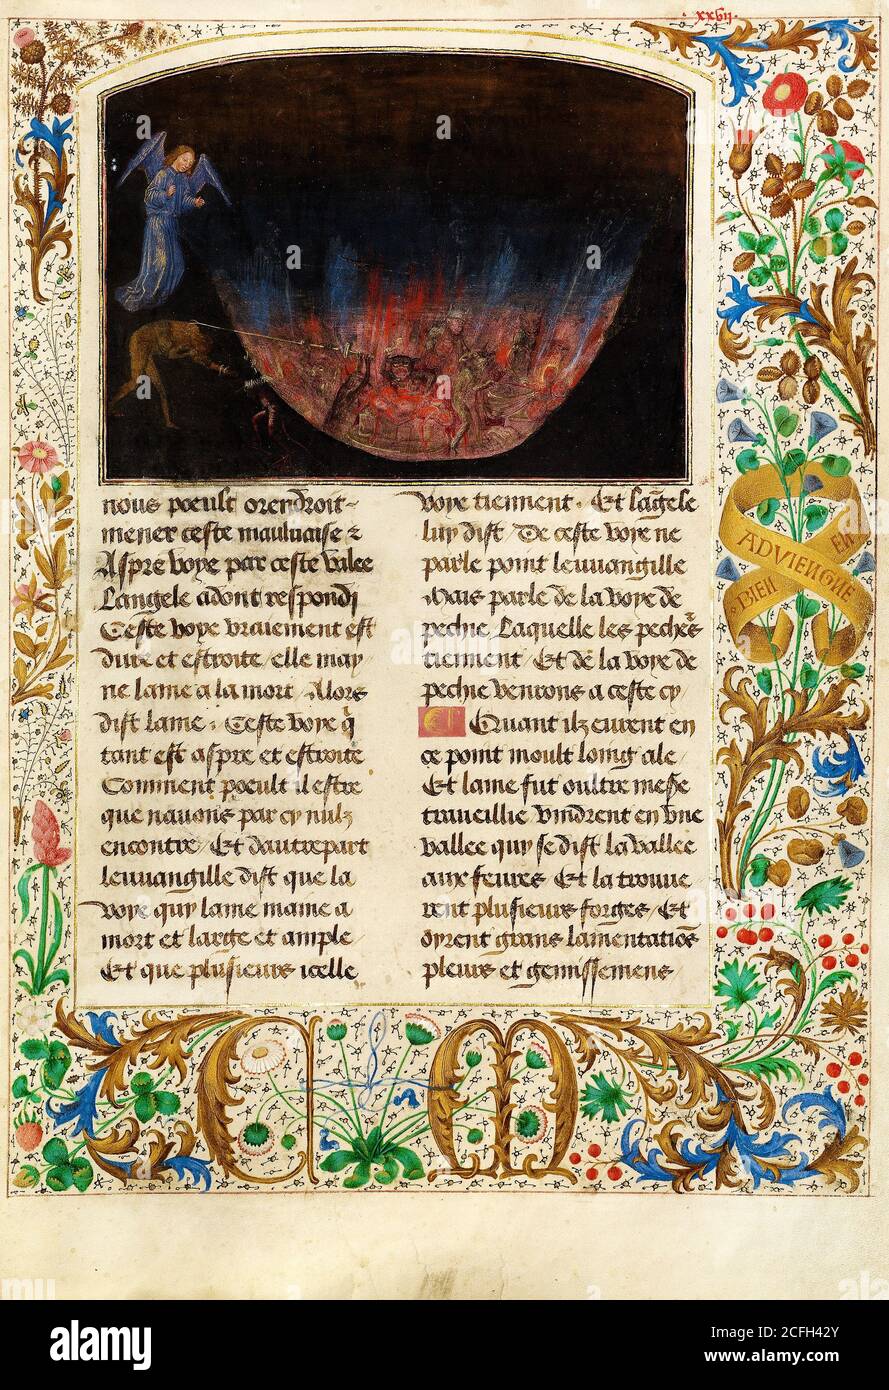 Simon Marmion, The Forge of Vulcan 1475 Tempera, gold, ink on parchment, The J. Paul Getty Museum, Los Angeles, USA. Stock Photo